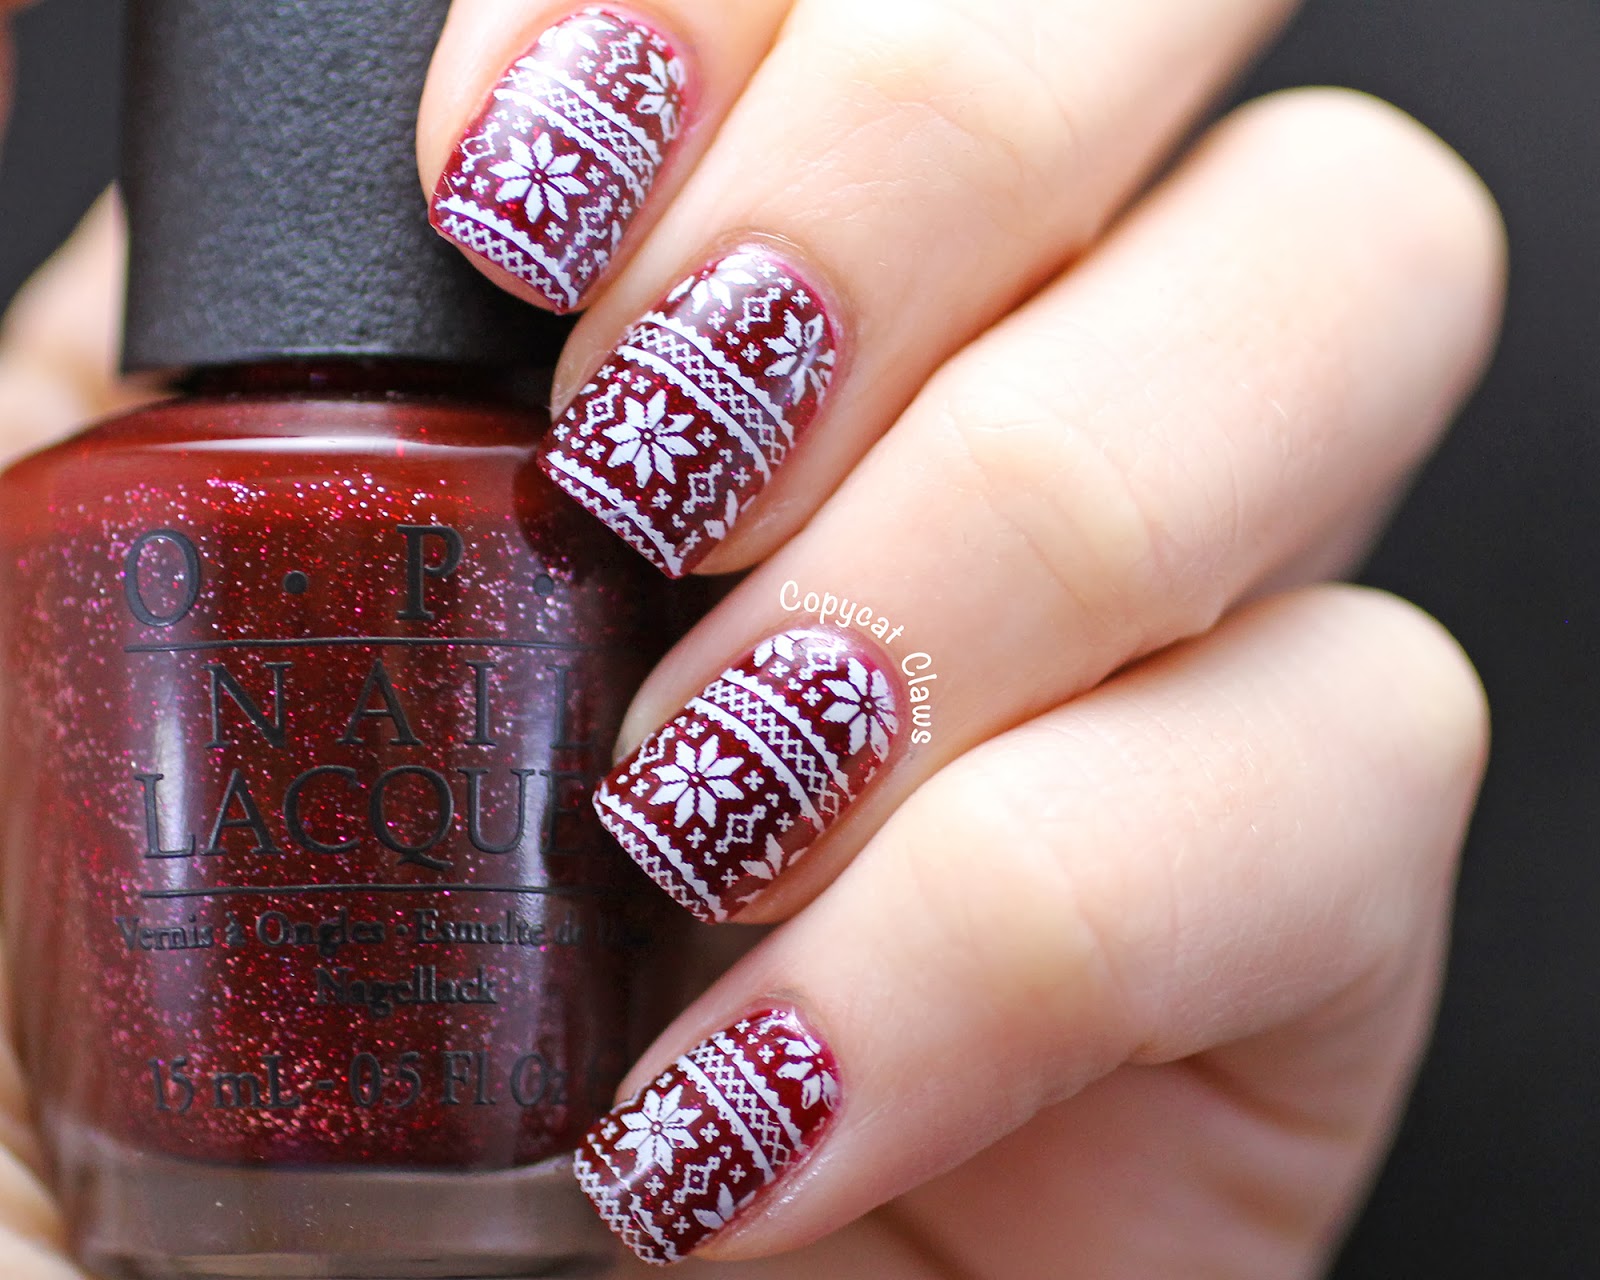 3. Easy DIY Christmas Sweater Nails - wide 6